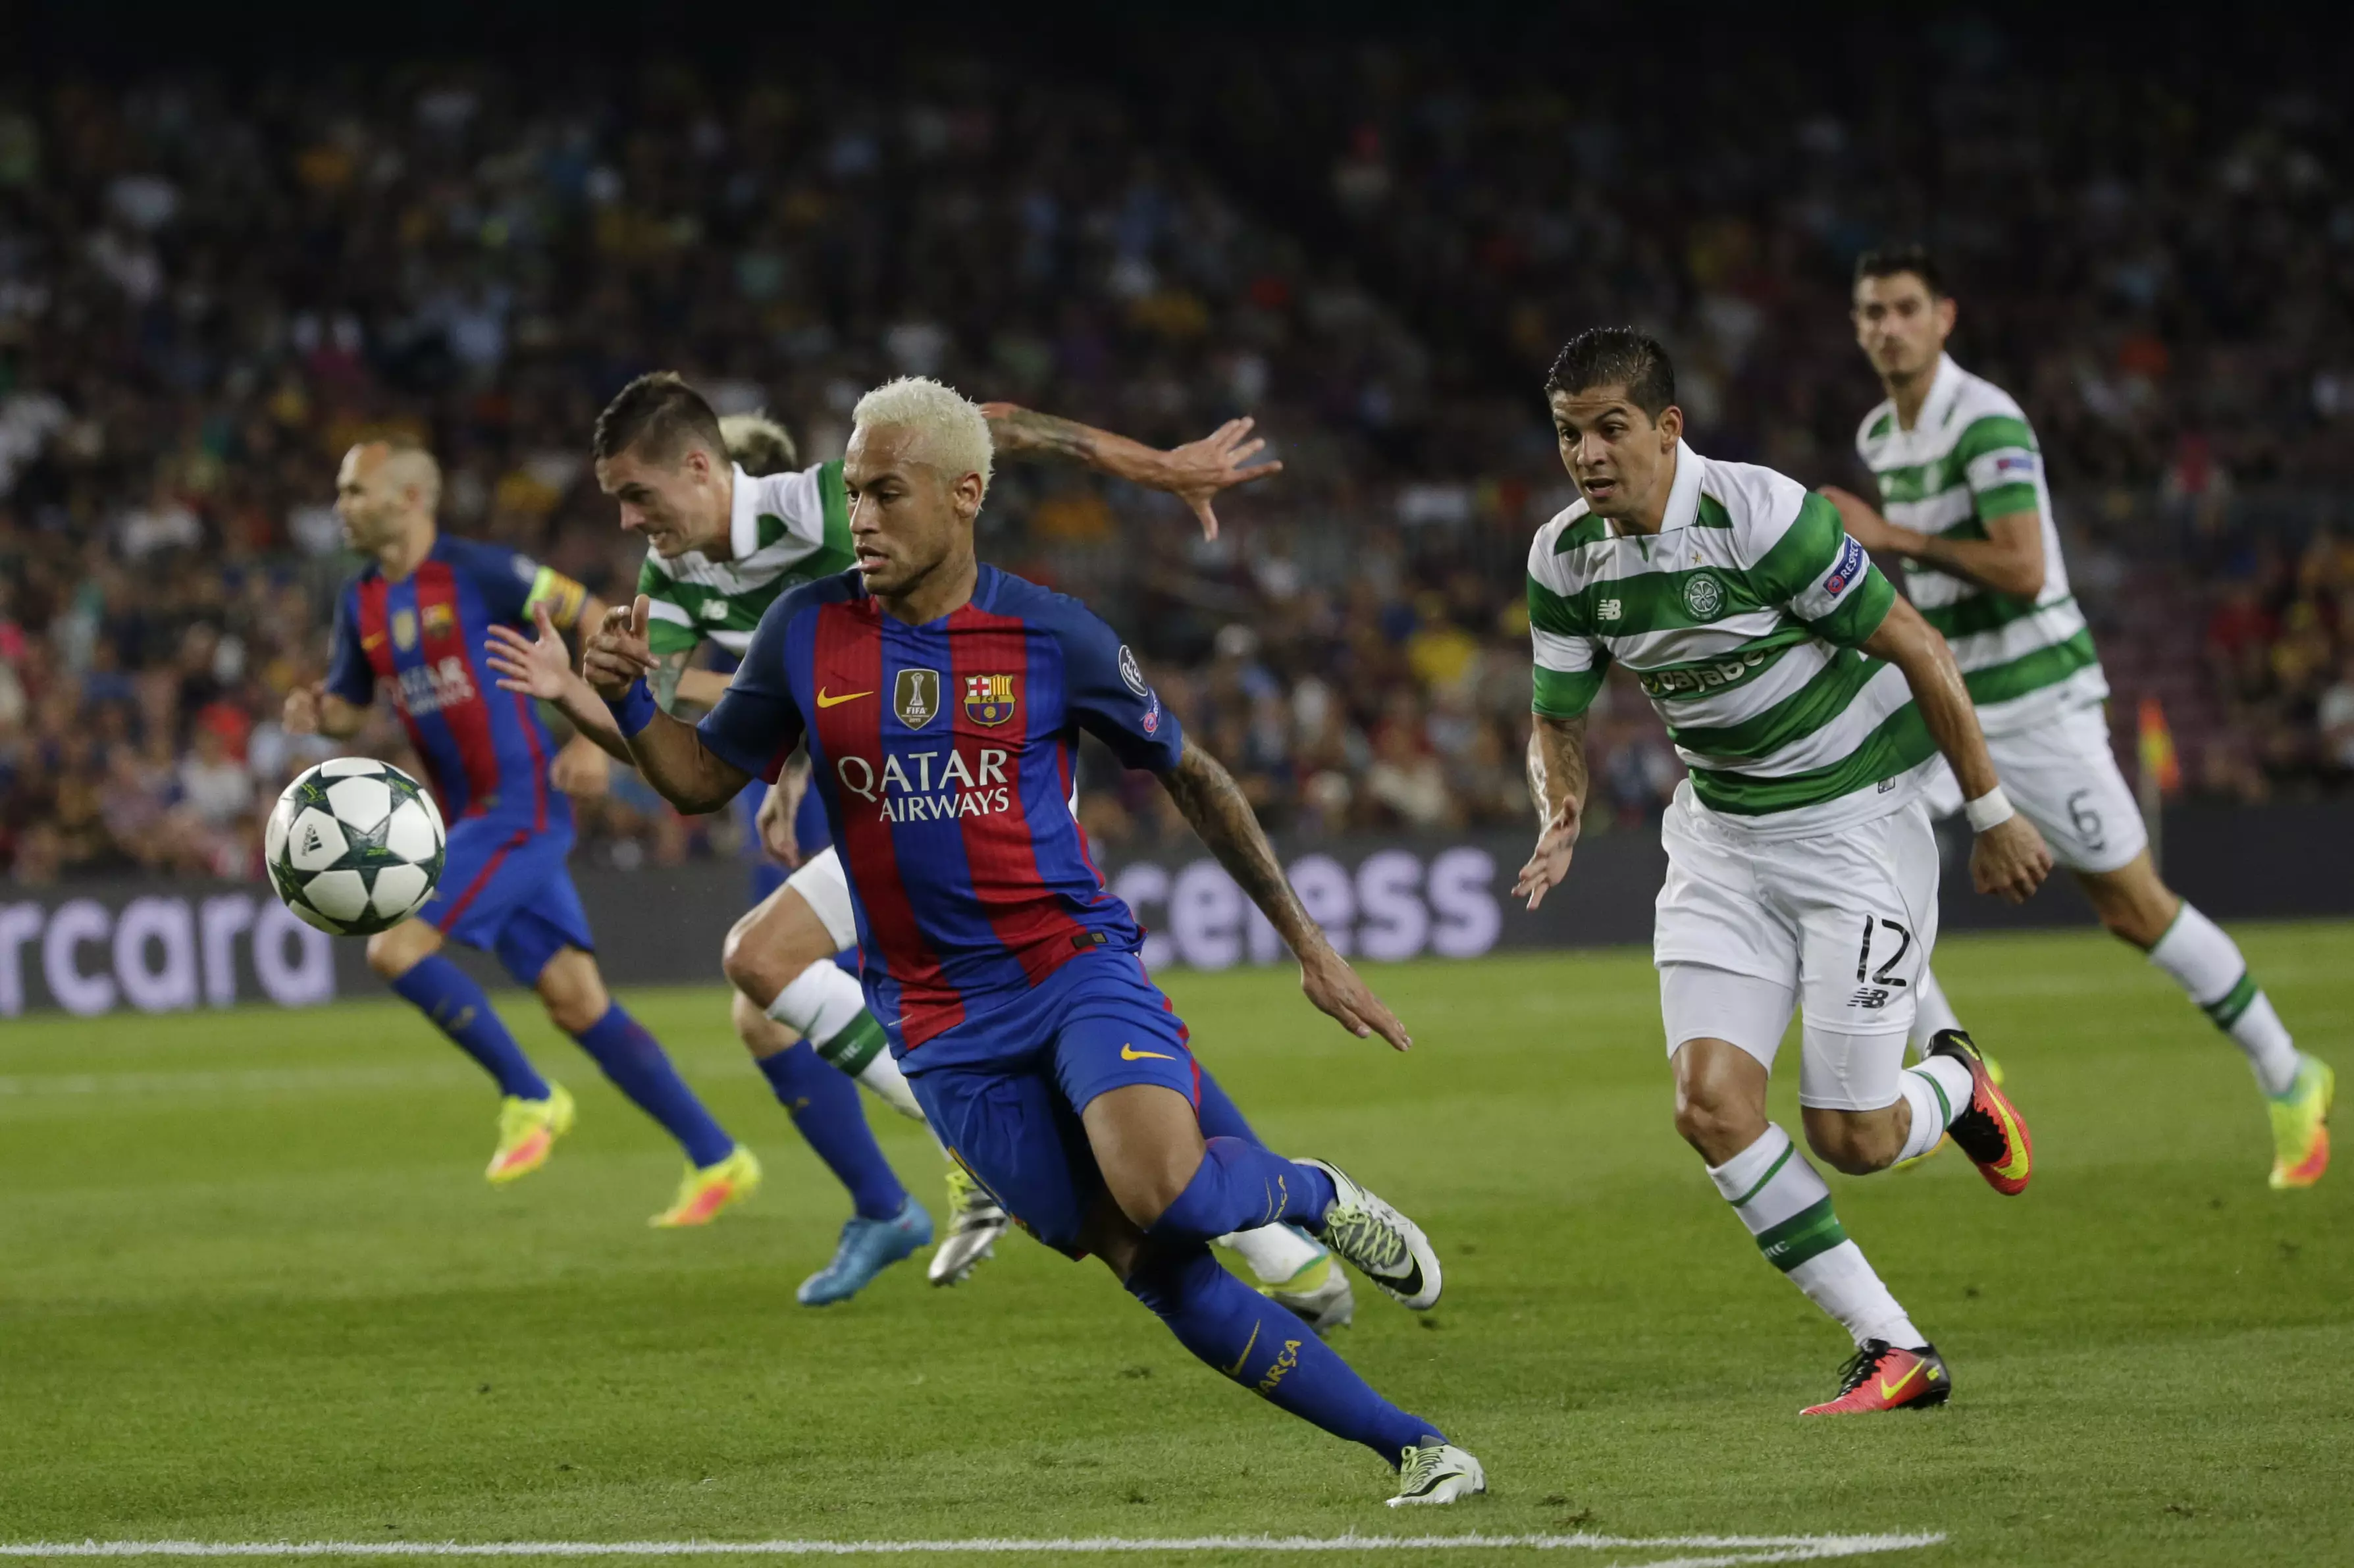 WATCH: Neymar’s Reaction To Scott Brown’s Push Is So Ridiculous It’s Funny